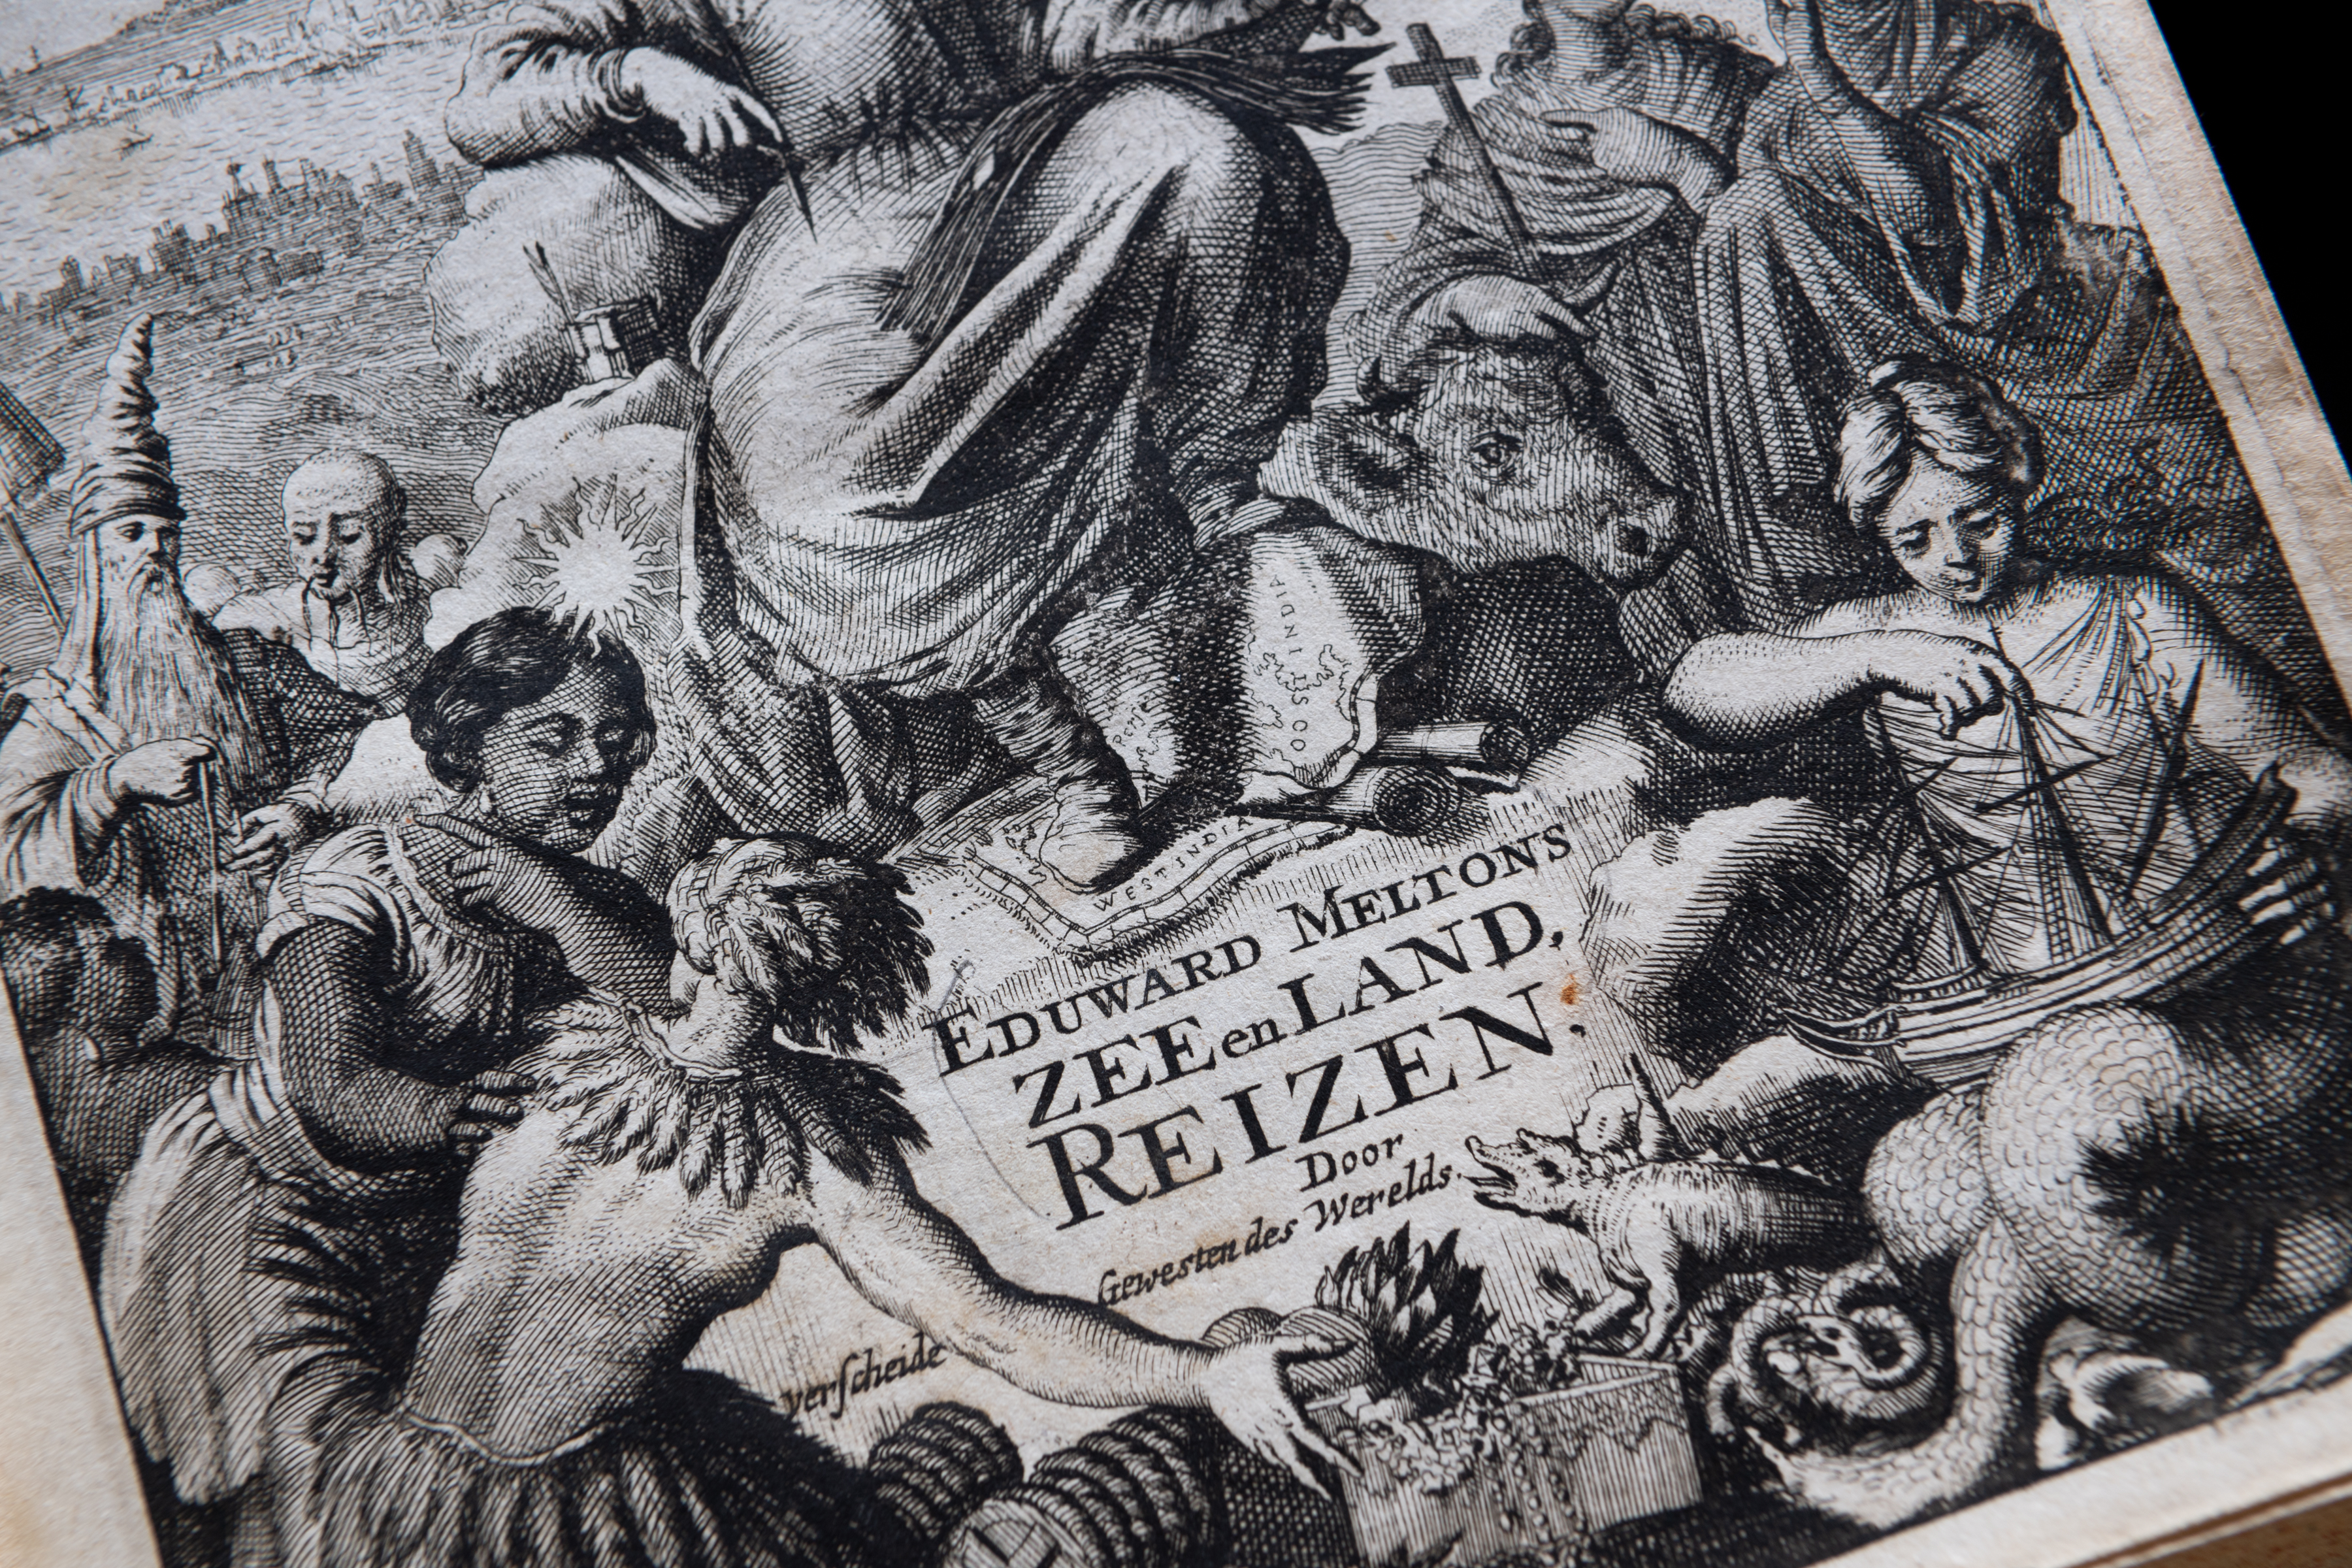 Detail of a printed book shows engraved title page depicting women, ships, and animals. Text in Dutch.